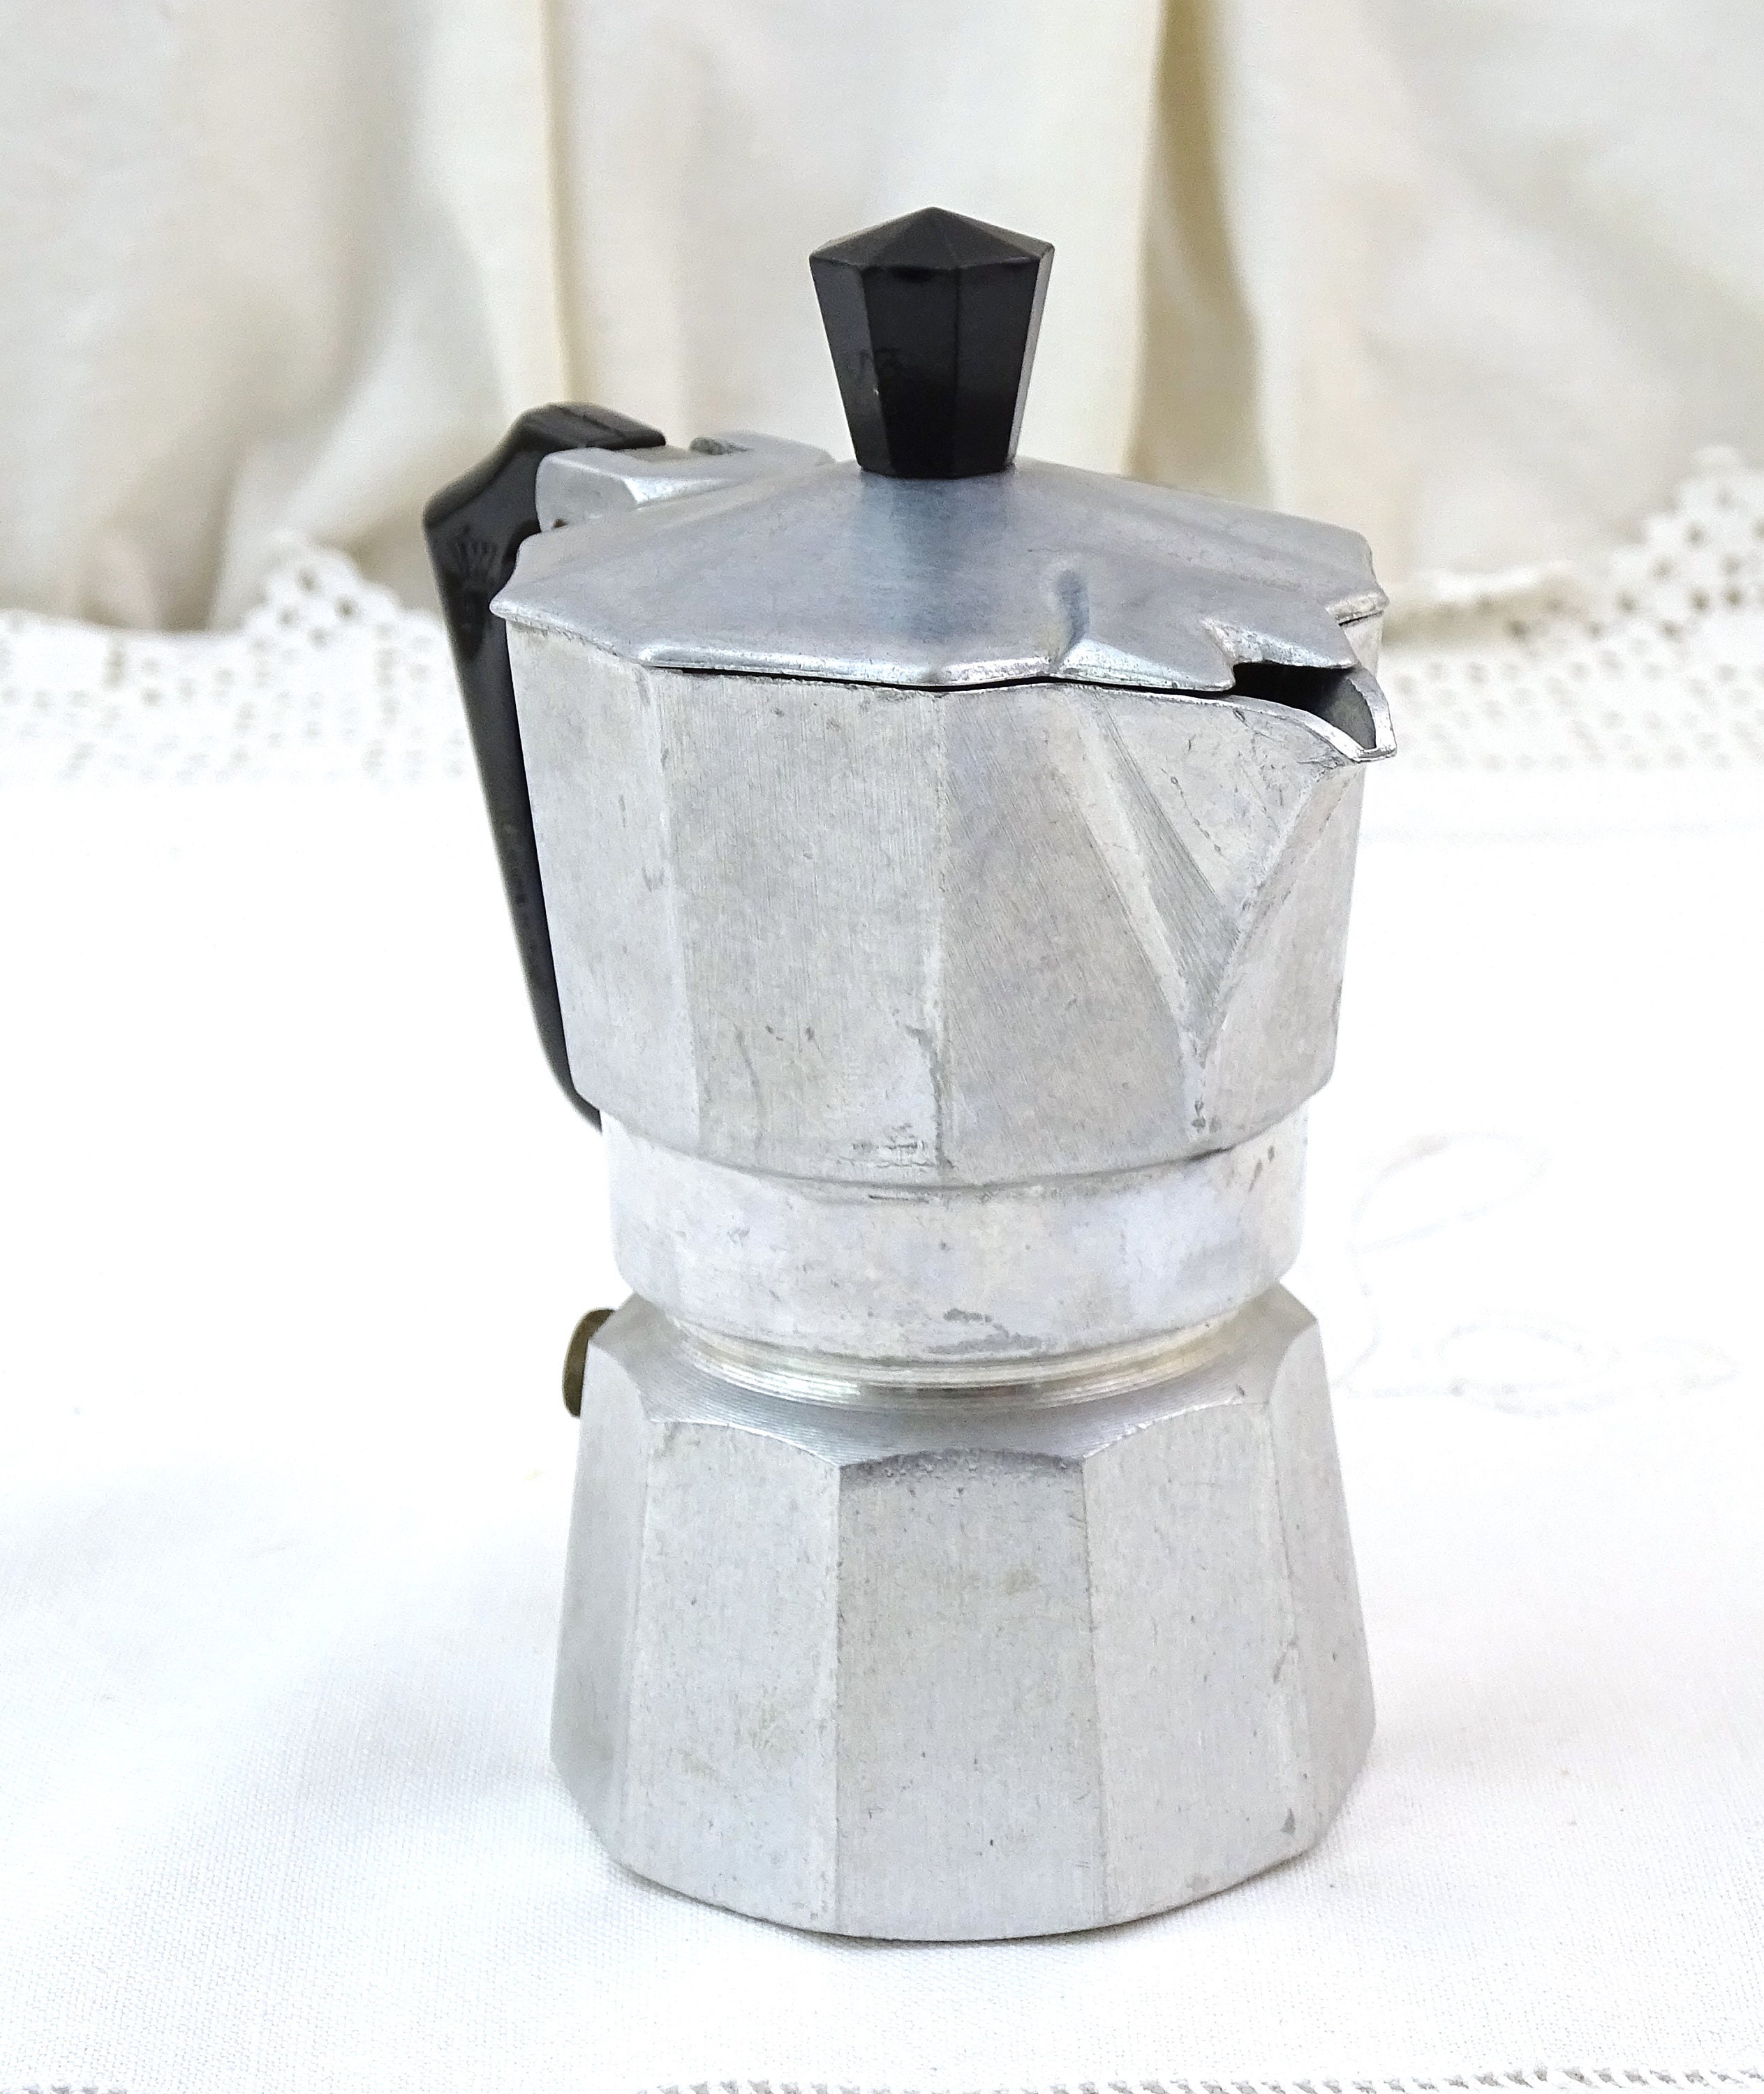 Small Vintage Italian Pezzetti Stove-top Espresso Coffee Maker made of  Metal in Excellent Condition, Retro One Cup Cafetiere from Italy